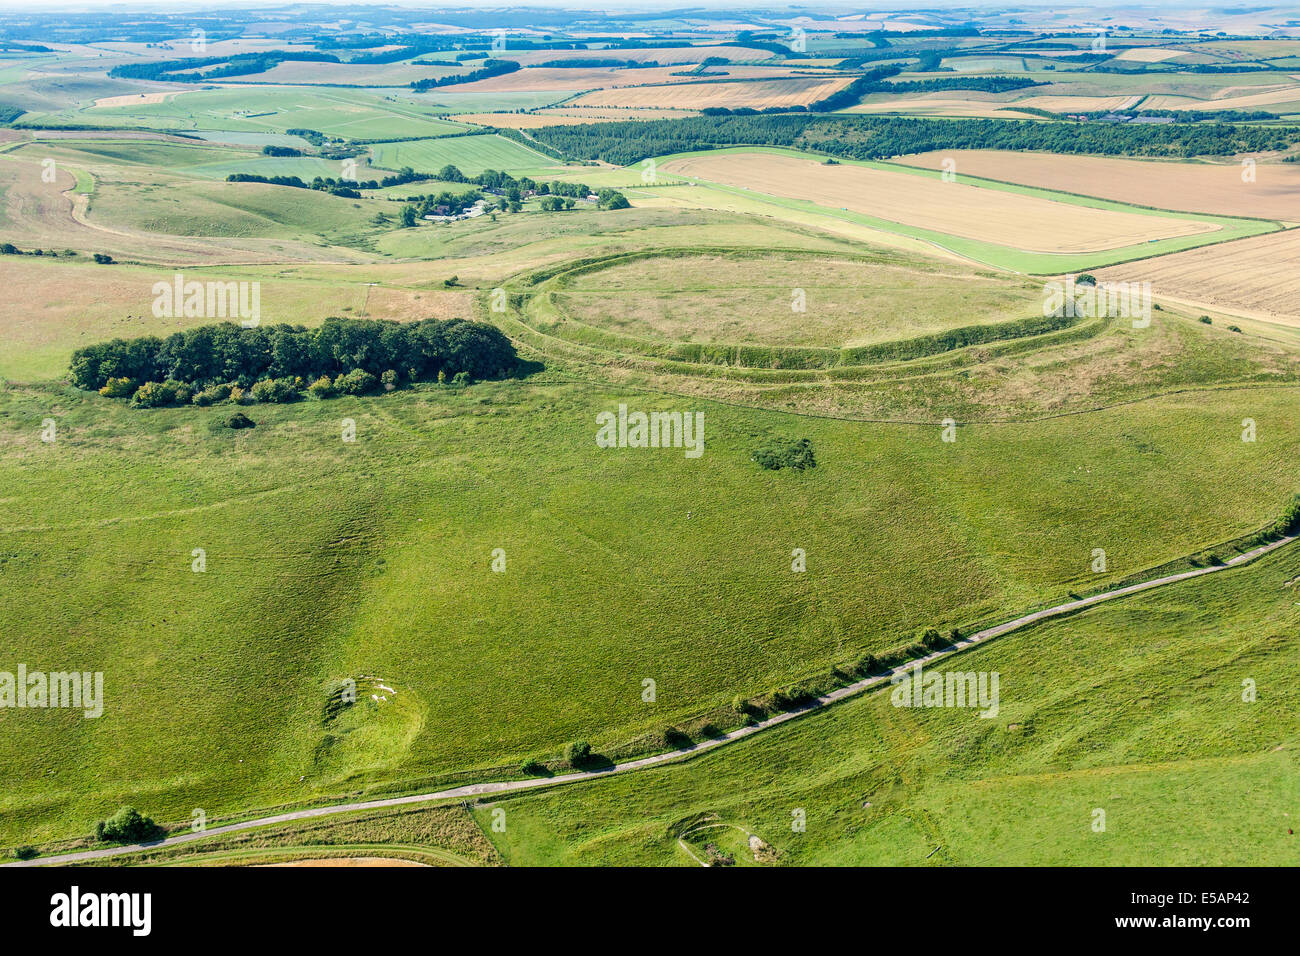 Aerial view Barbury Castle or Camp, near Swindon, on the Wiltshire downs, and the Ridgeway ancient road lower right, UK. JMH6164 Stock Photo